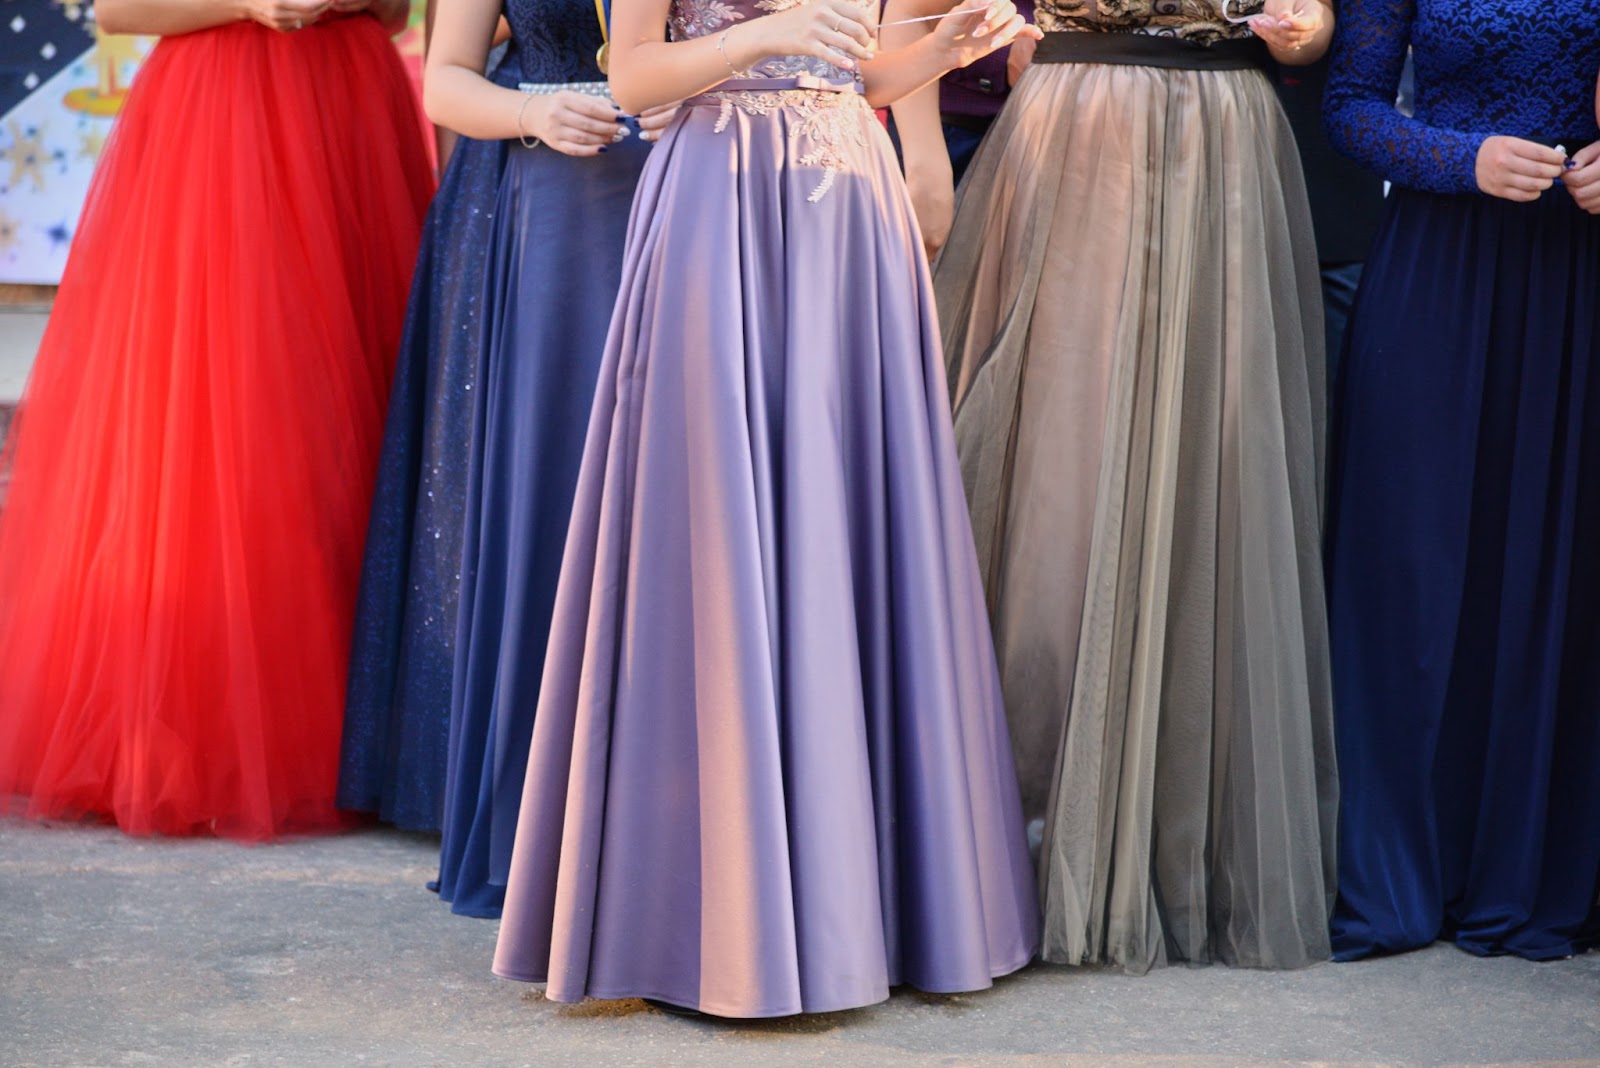 The History of Prom & Prom Dresses Over the Years